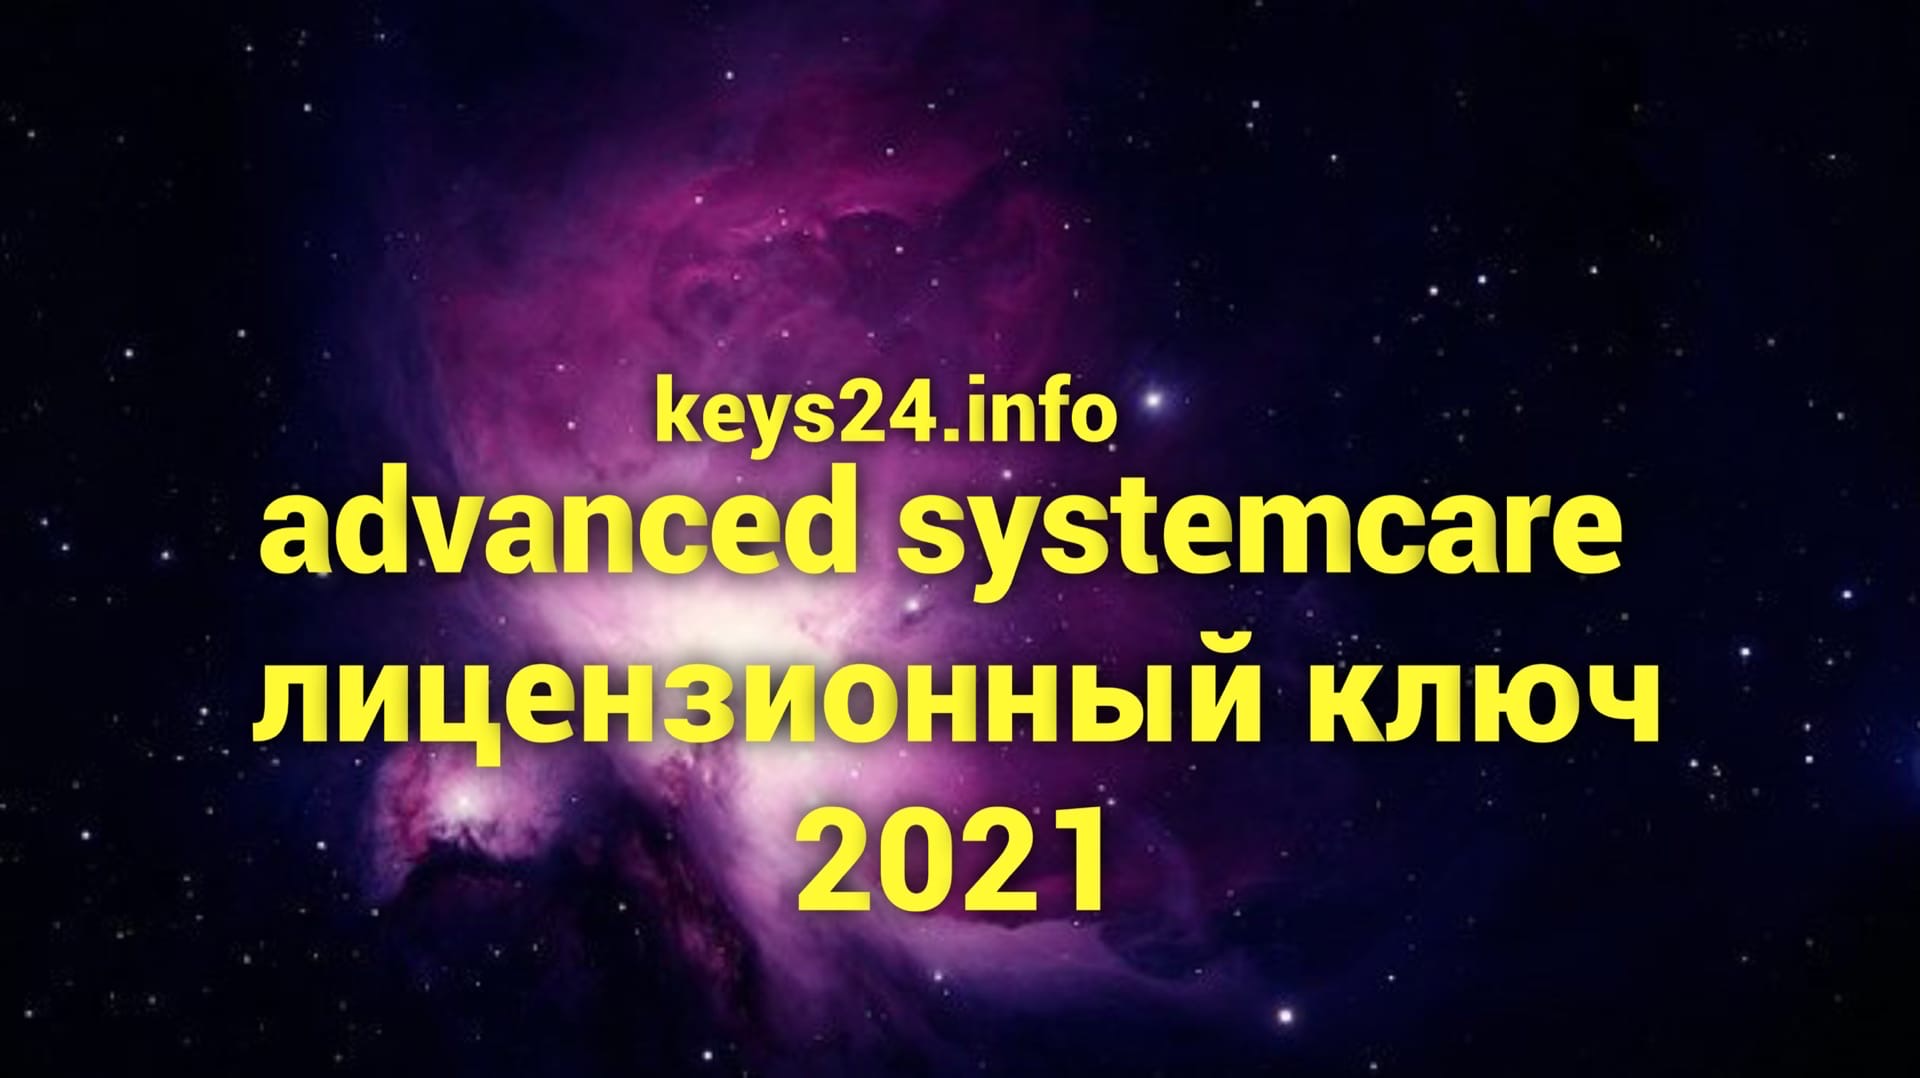 advanced systemcare licenzionniy kluch 2021